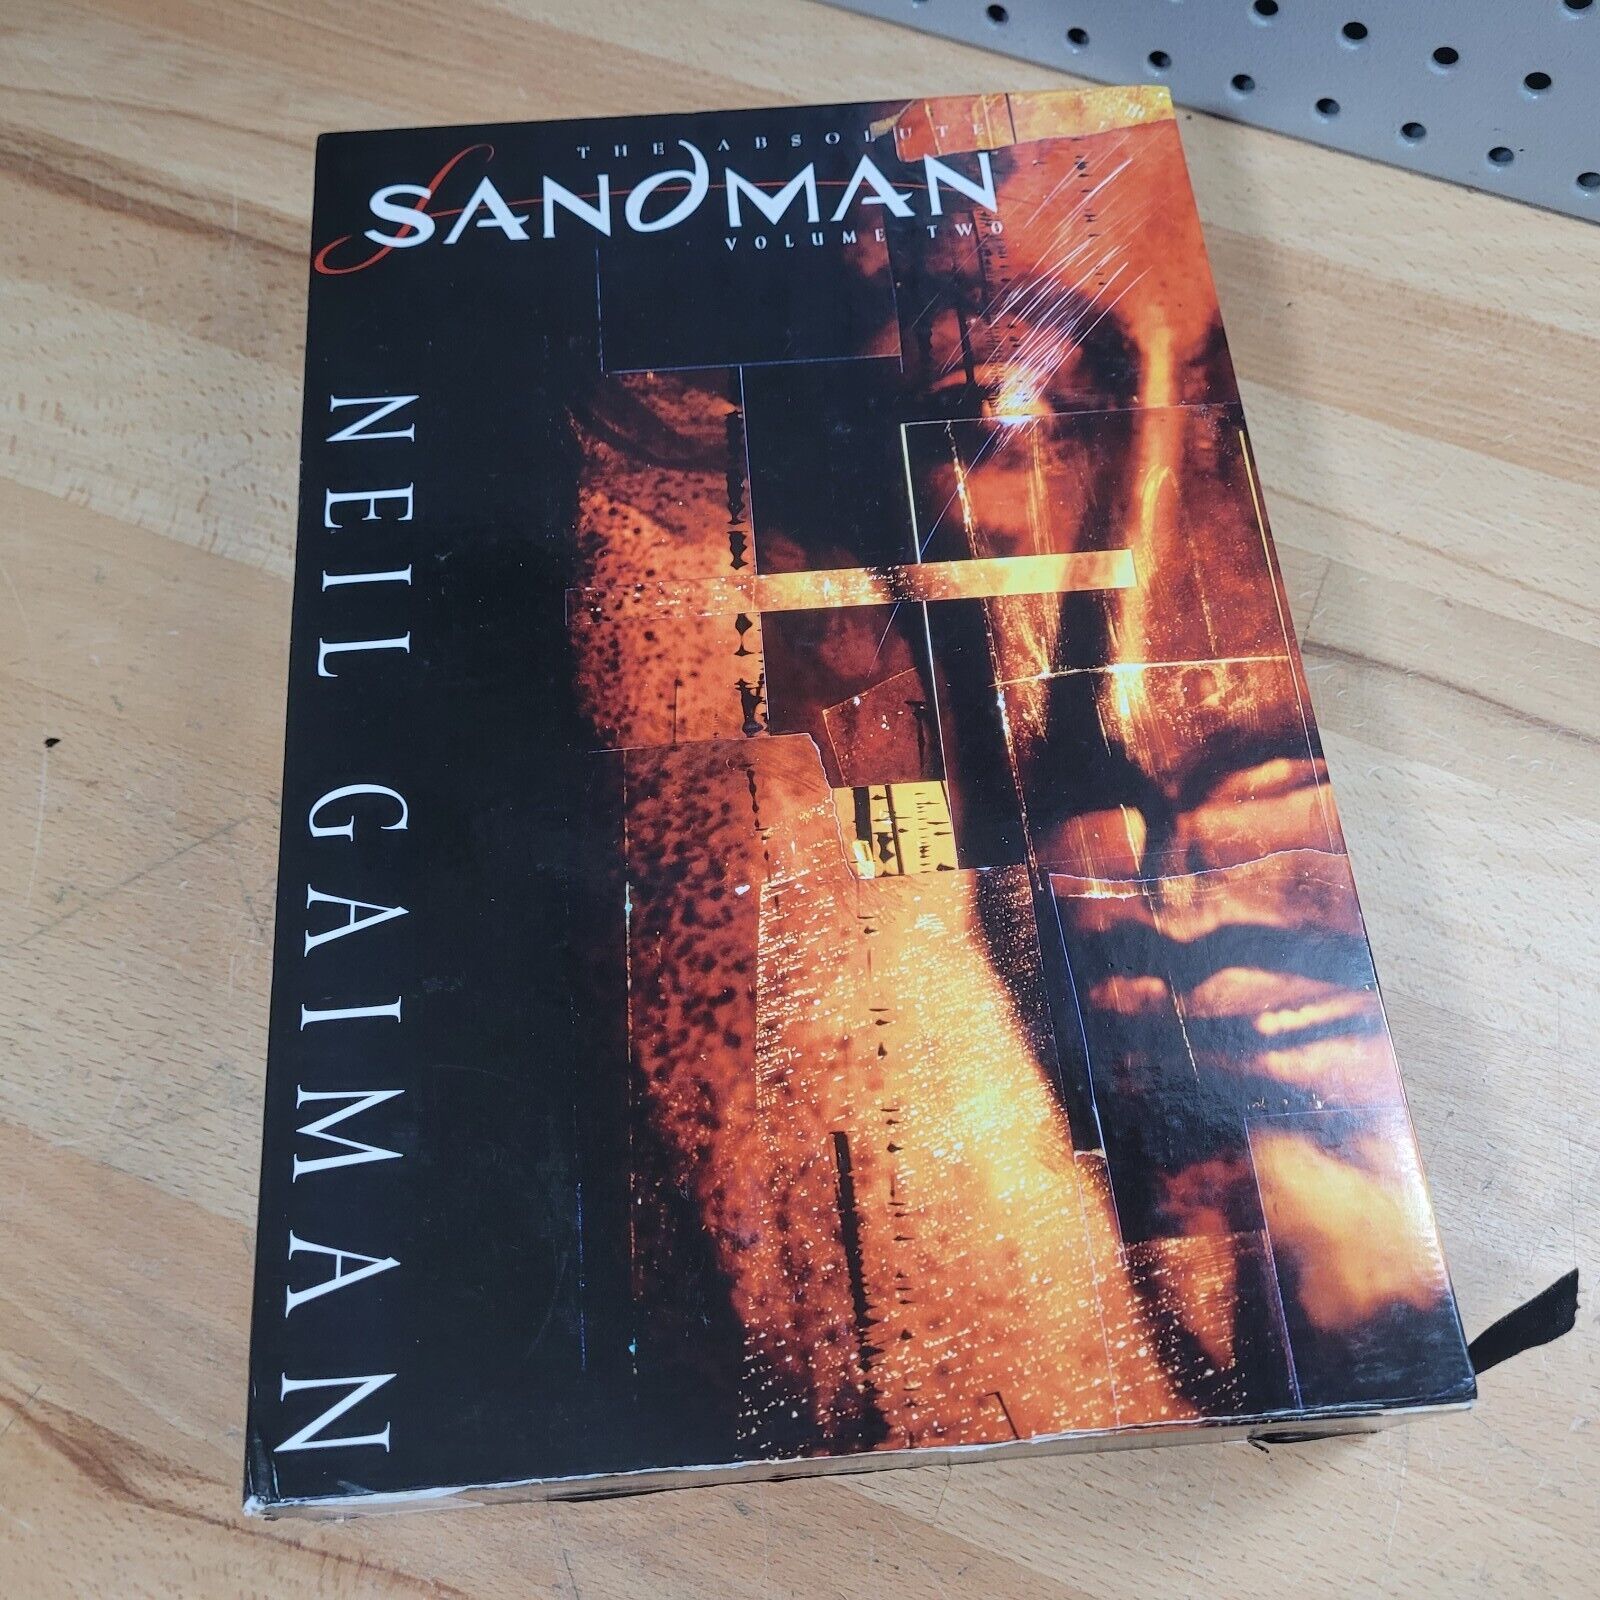 The Absolute Sandman #2 (DC Comics, December 2007) Hardcover with Slipcase